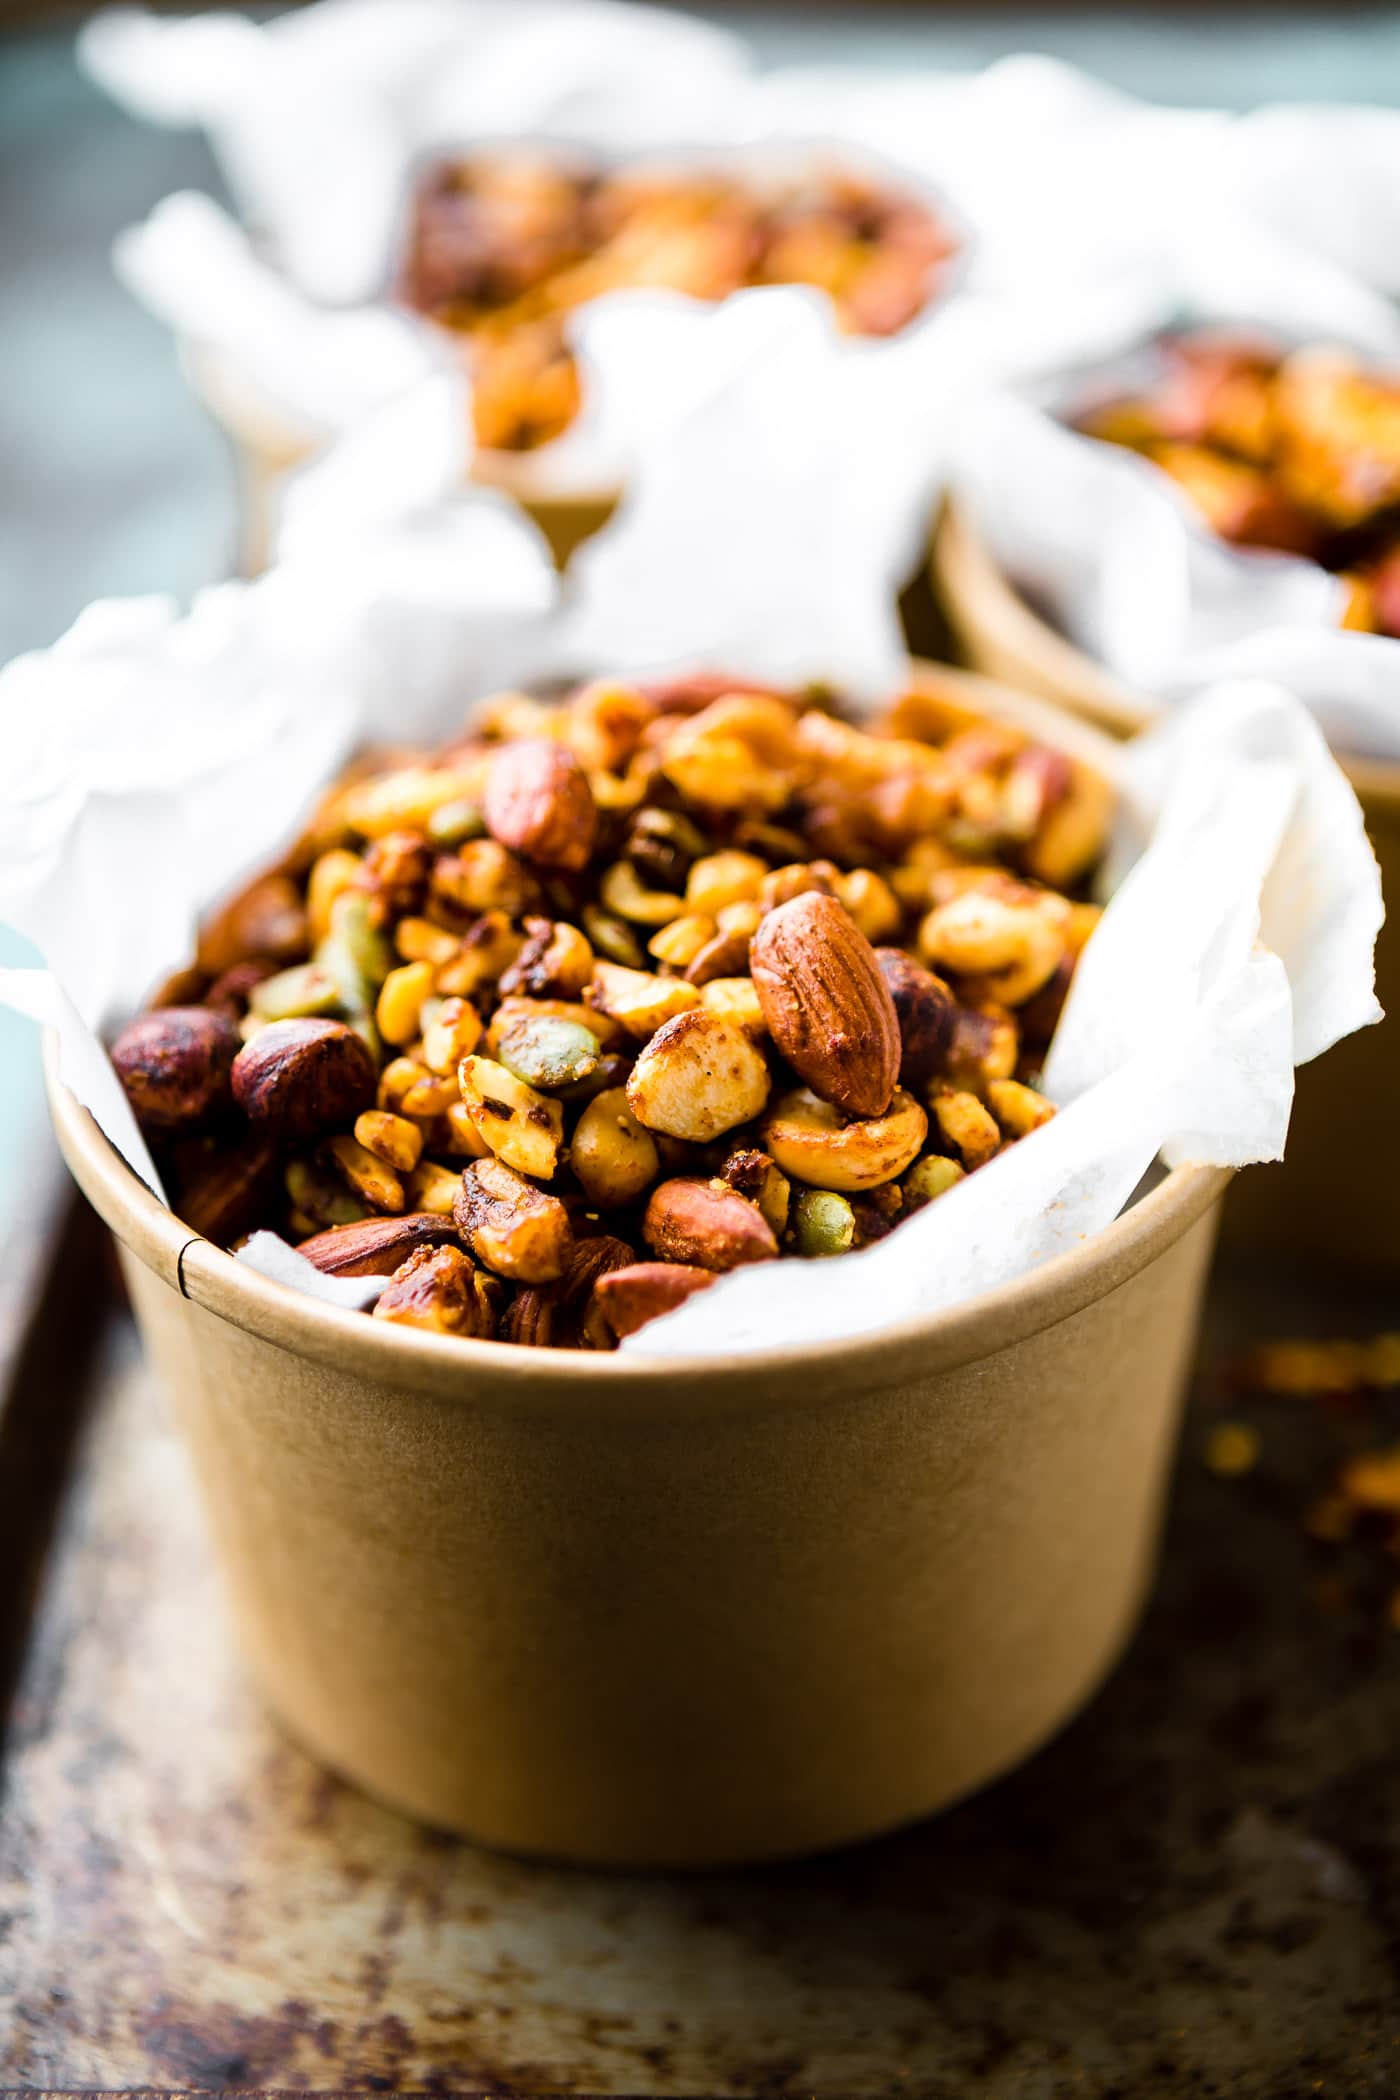 This Thai Curry Spiced Slow Cooker snack mix is the perfect salty sweet gluten-free snack that’s packed with flavor and superfood nutrition! Something easy to make that's healthy and great for snacks, appetizers, and on the go! The nuts and seeds are slow cooked in an addictive coating full of curry spices, unrefined sugar, gluten free Tamari (gluten free soy sauce),  then tossed with more superfood ingredients like goji berries and dried pineapple. See, perfectly sweet and spicy! Oh, and it’s also paleo friendly and vegan friendly. A bonus for sure!